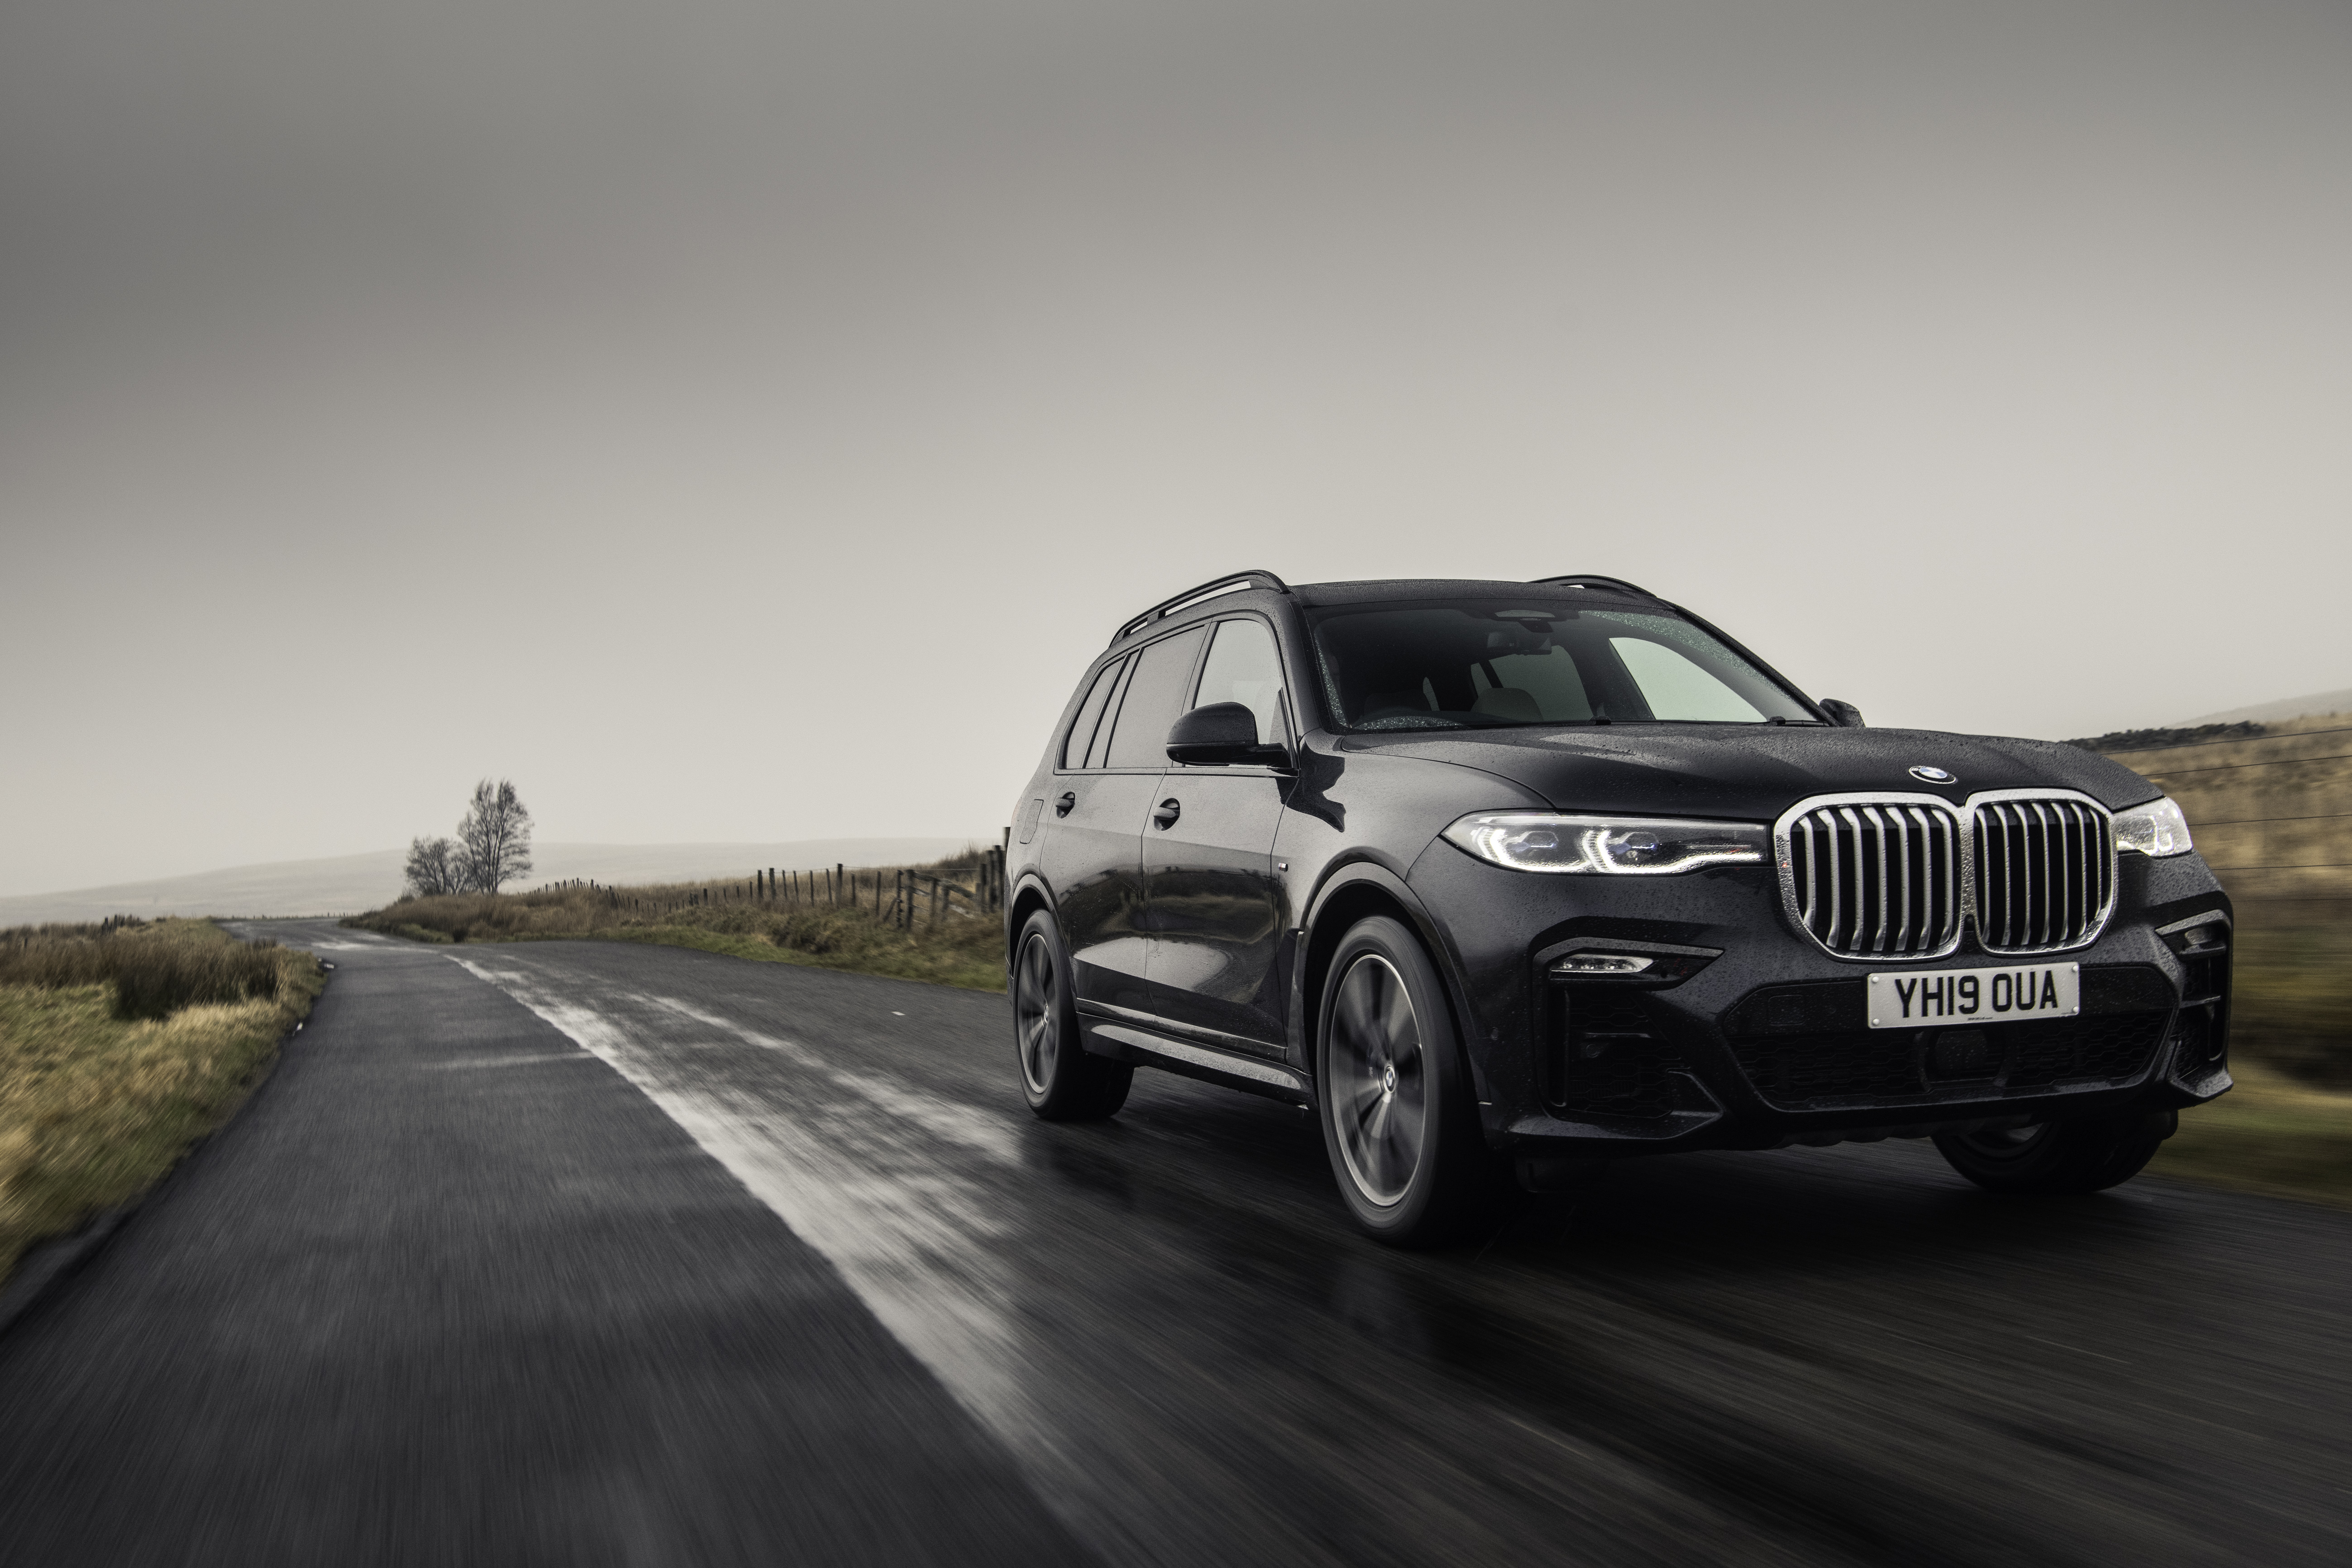  Bmw X7 HQ Background Images